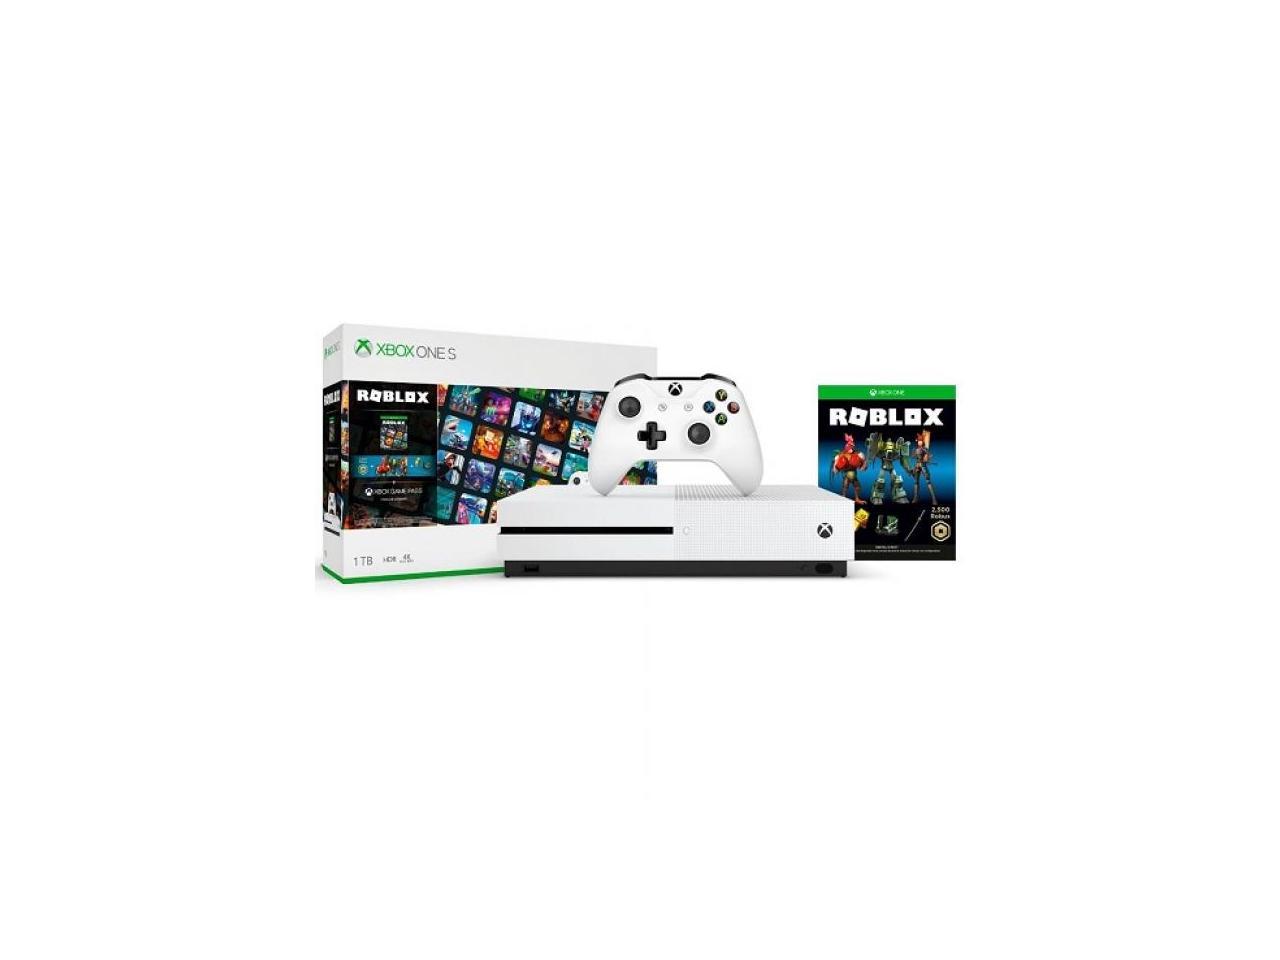 Xbox One S 1tb Roblox Console Bundle White Xbox One S Console Controller Full Download Of Roblox Included 4k Ultra Hd Blu Ray Video Streaming 3 Avatar Bundles - xbox one s roblox bundle 1tb xbox